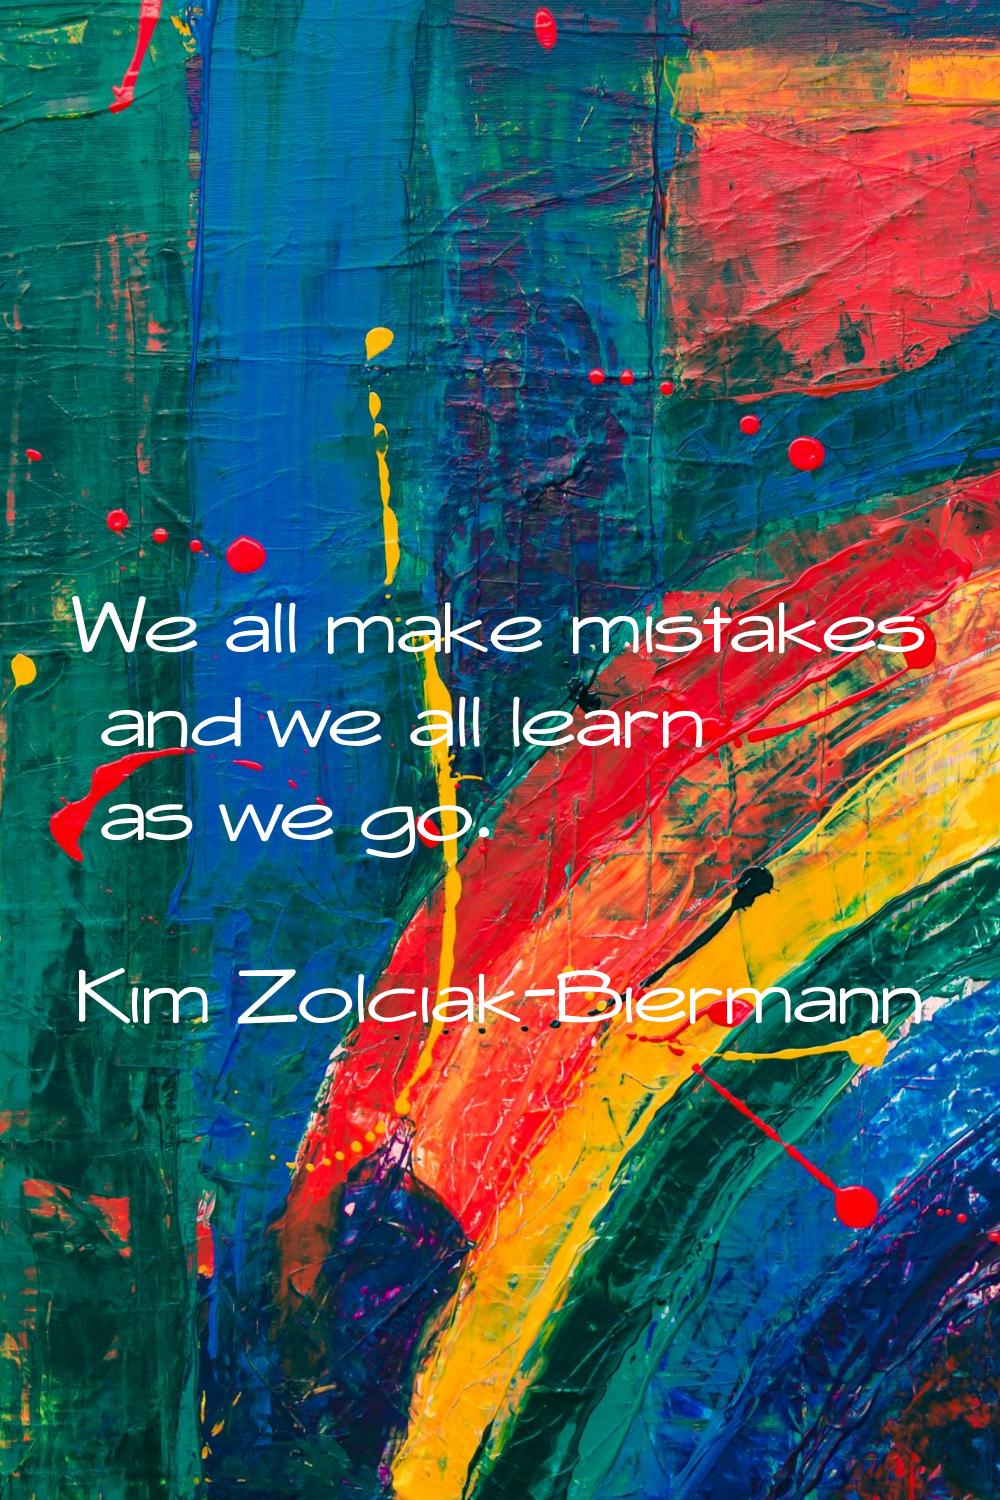 We all make mistakes and we all learn as we go.